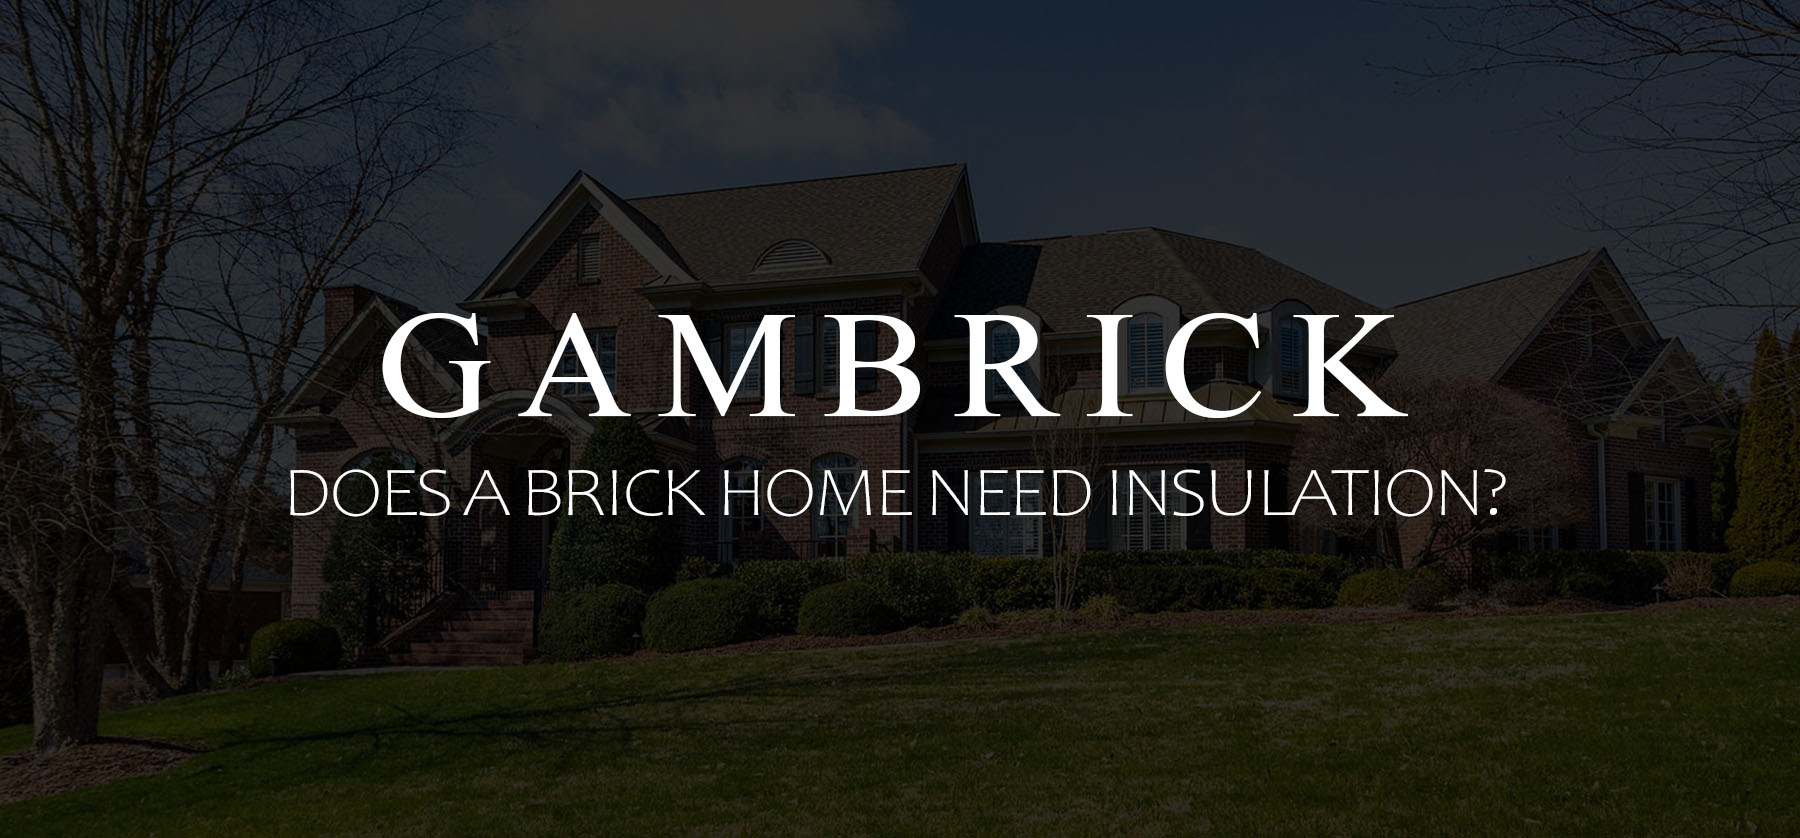 does a brick home need insulation banner pic